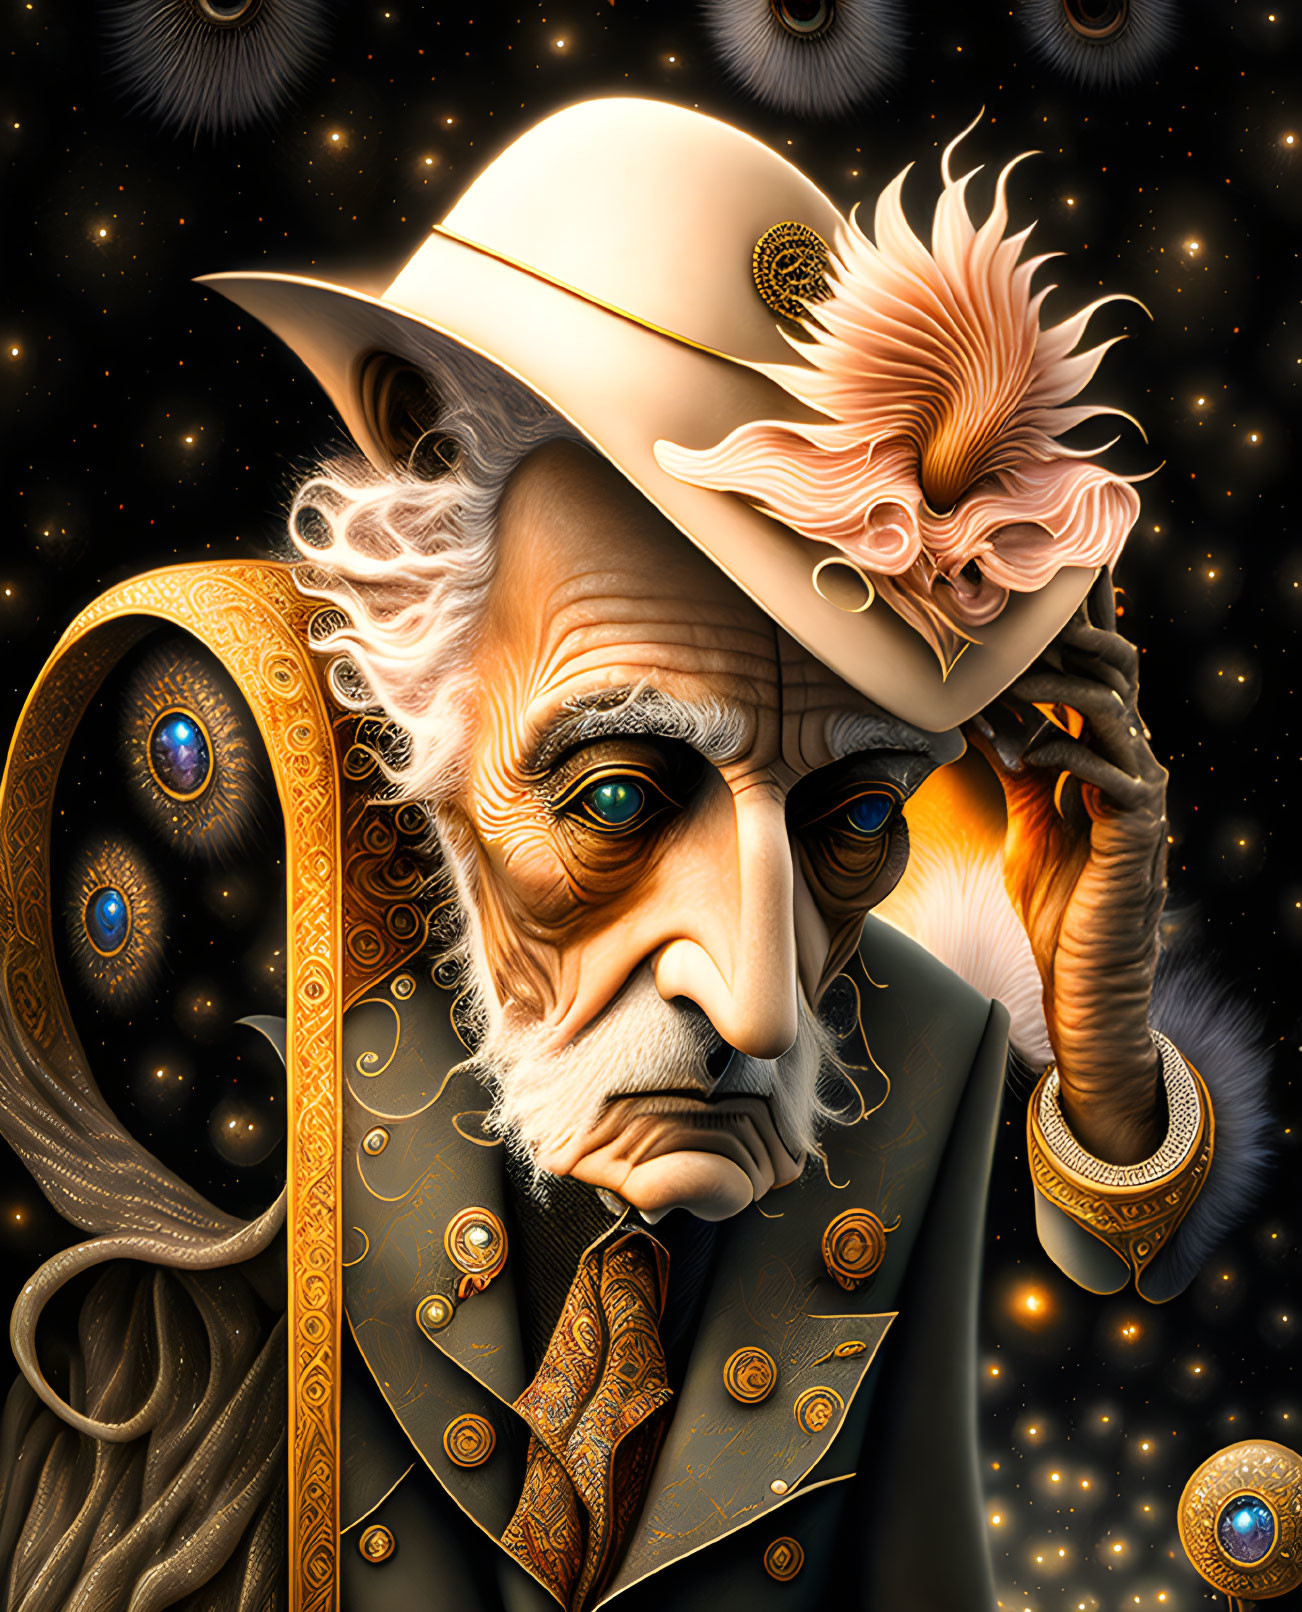 Illustration of older man with cosmic features and time motifs wearing hat